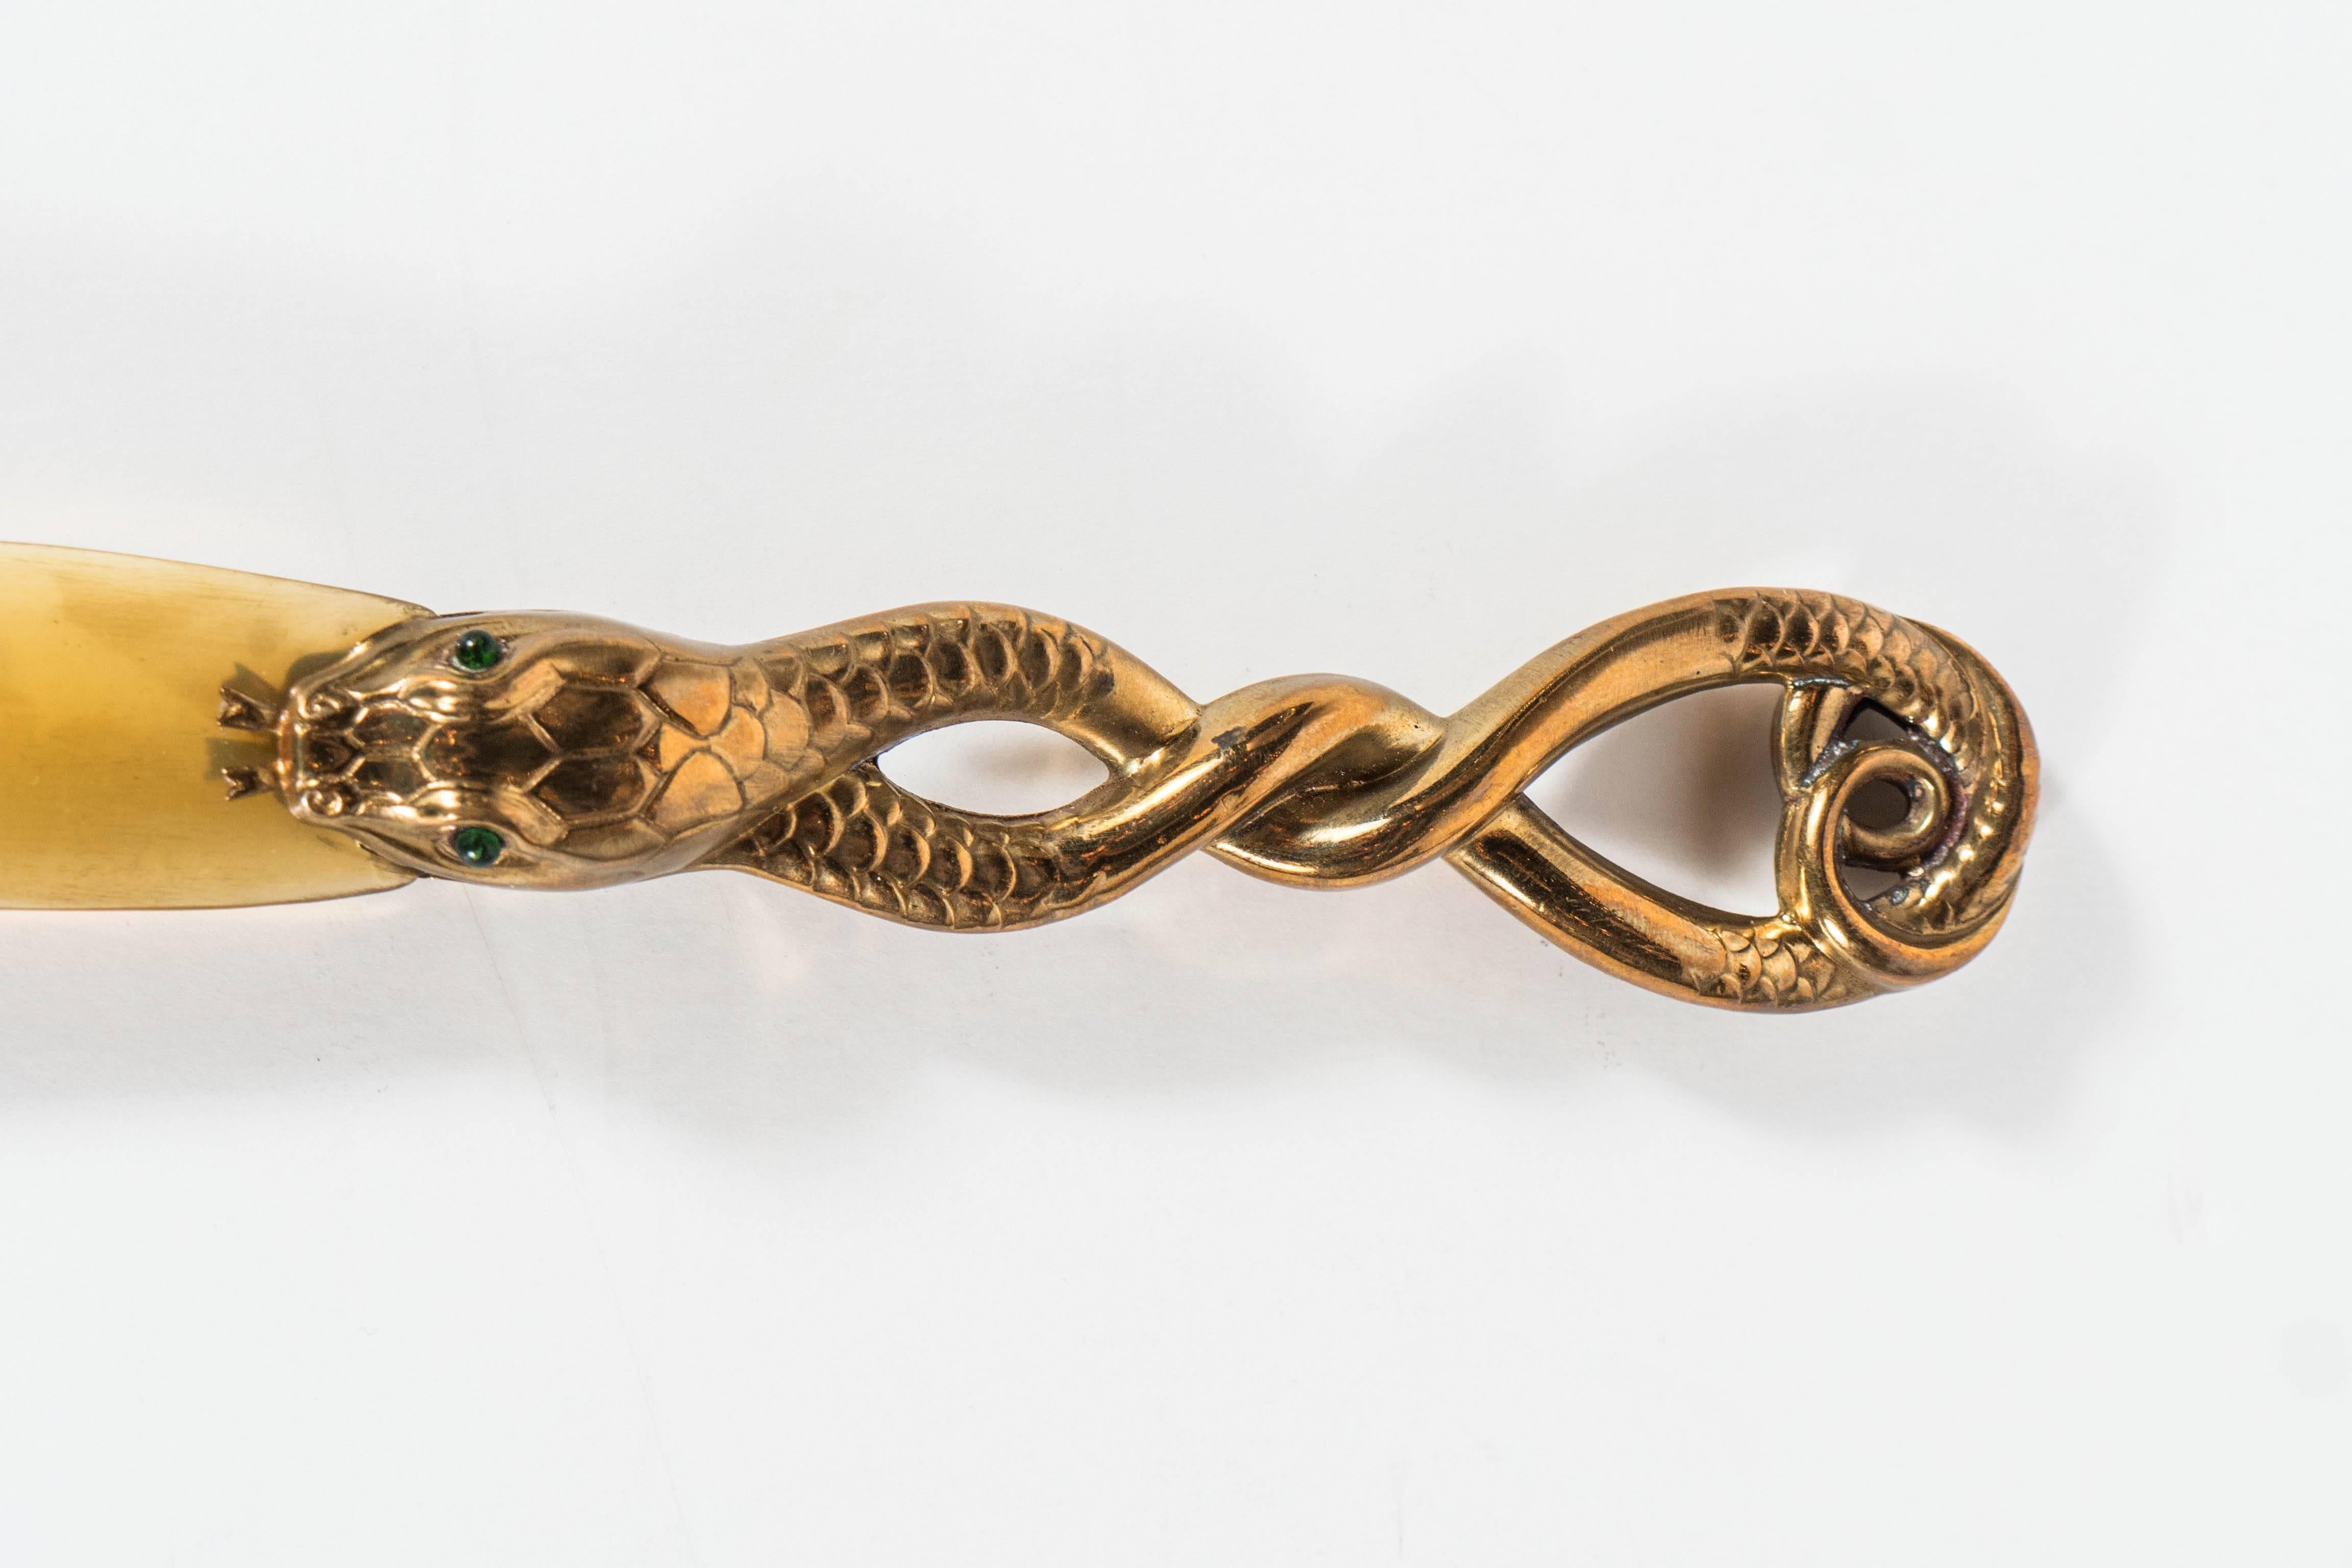 This exquisite Victorian letter opener is hand-wrought brass. lt has cabochon emerald eyes and an amber colored Horn blade. This is truly a remarkable piece that was originally purchased at James two Galleries at east Fifty Seventh Street NY, NY a